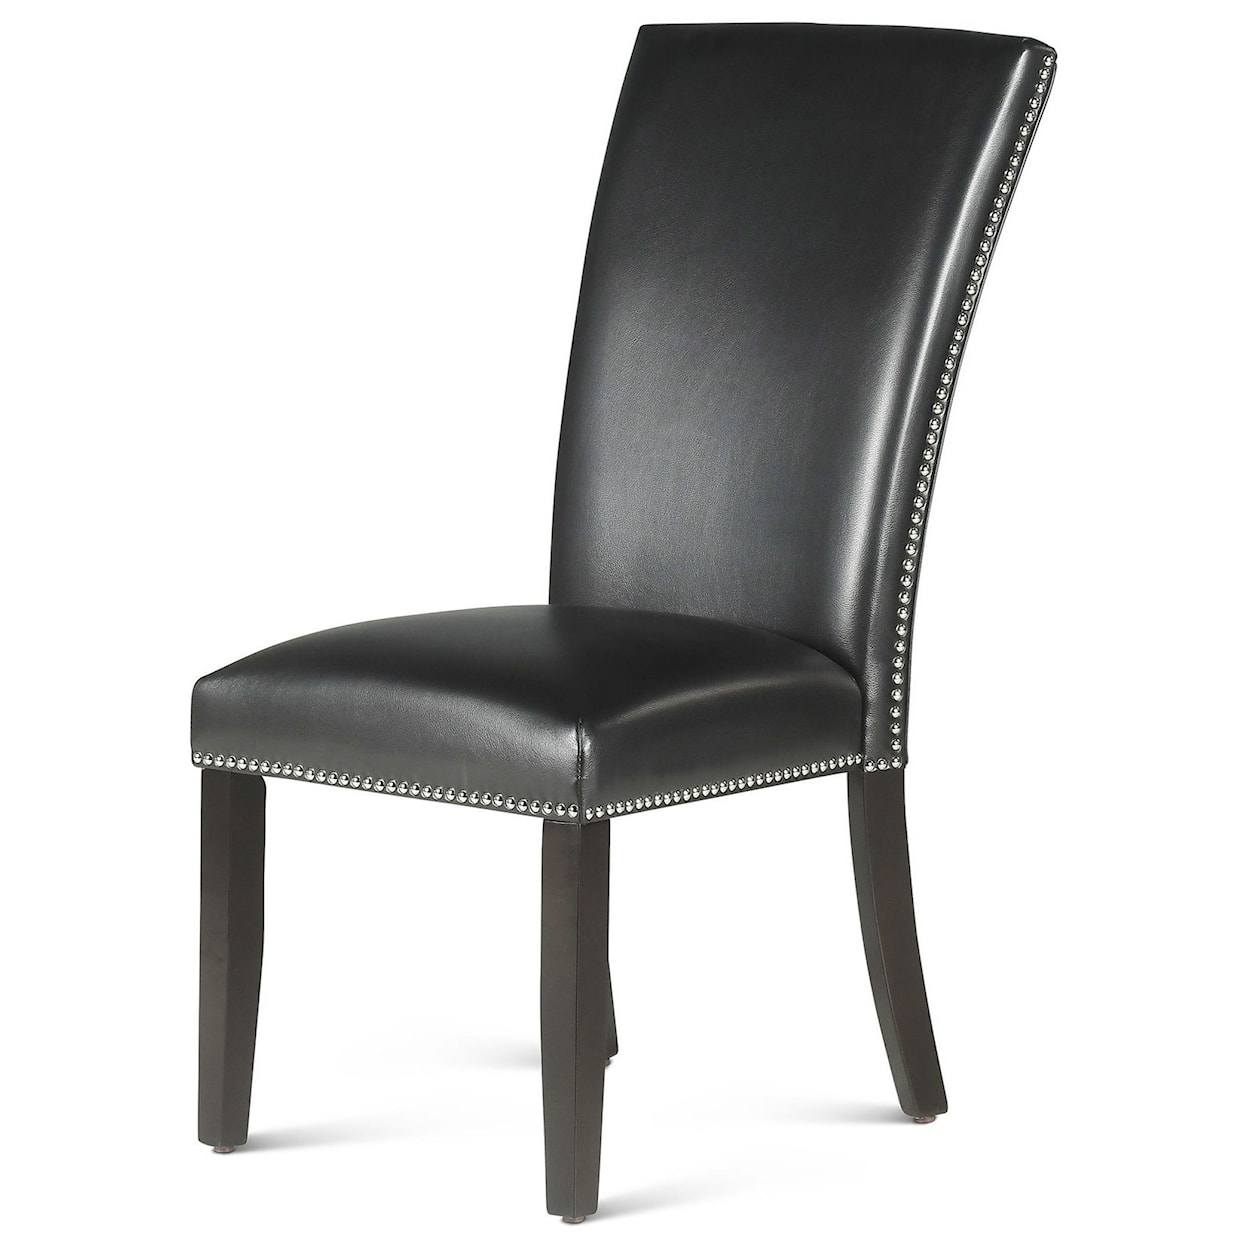 Steve Silver Finley Dining Side Chair